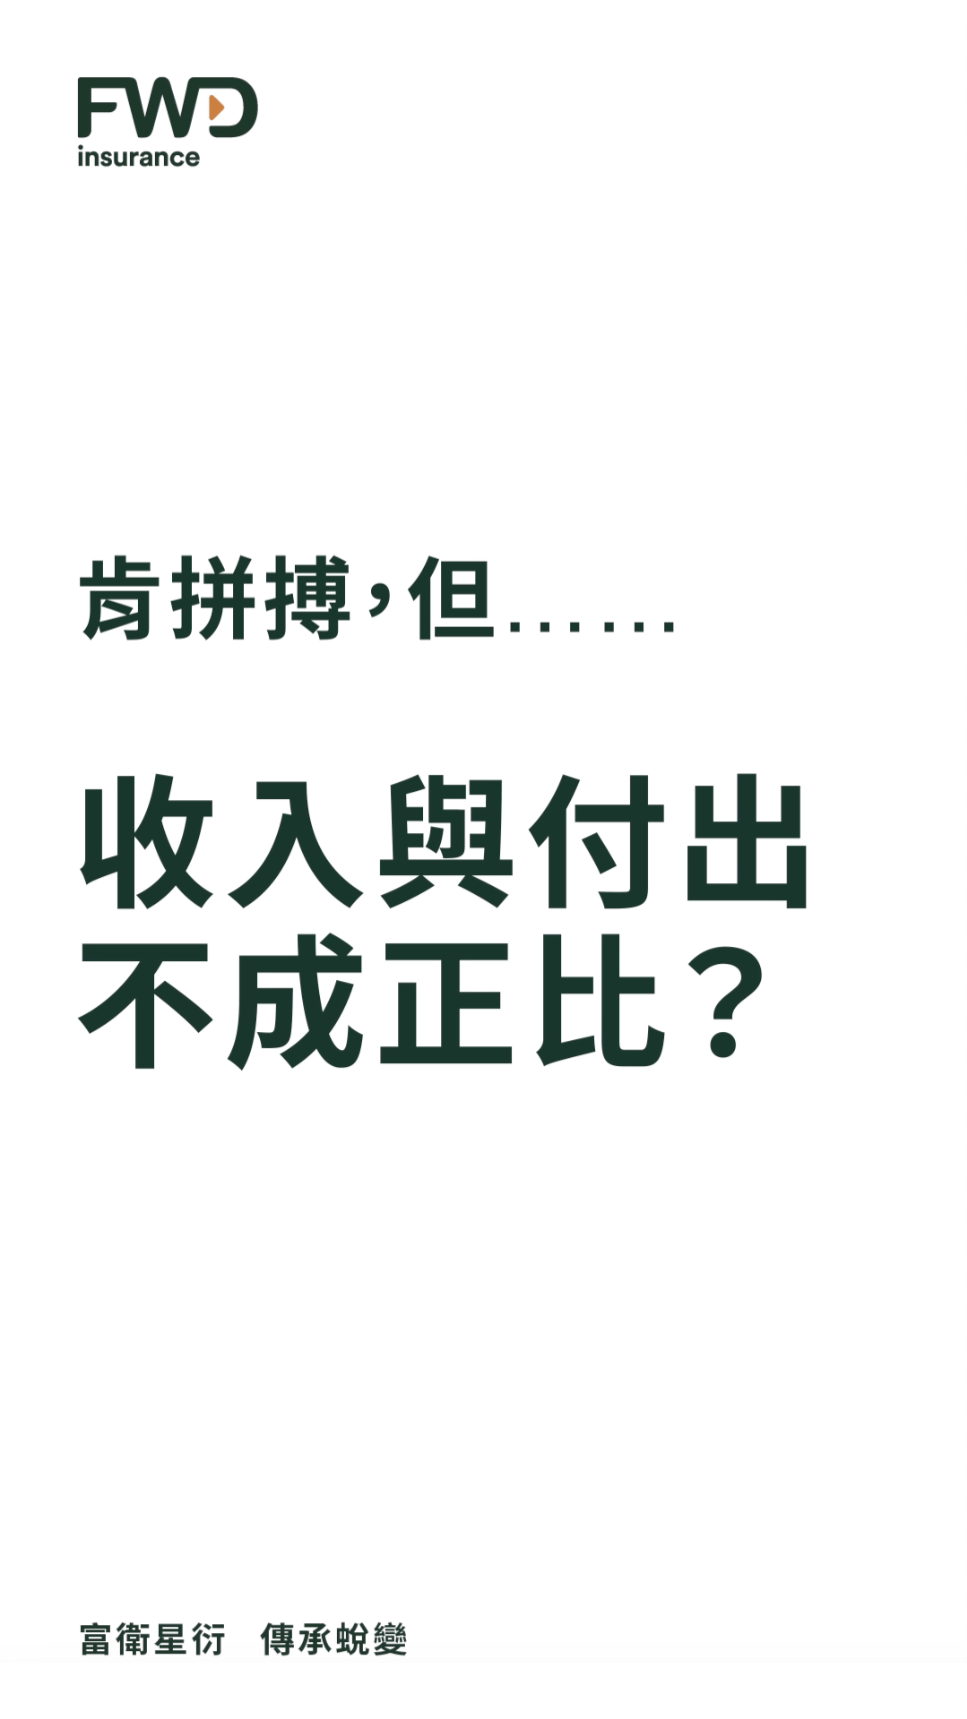 question2.png